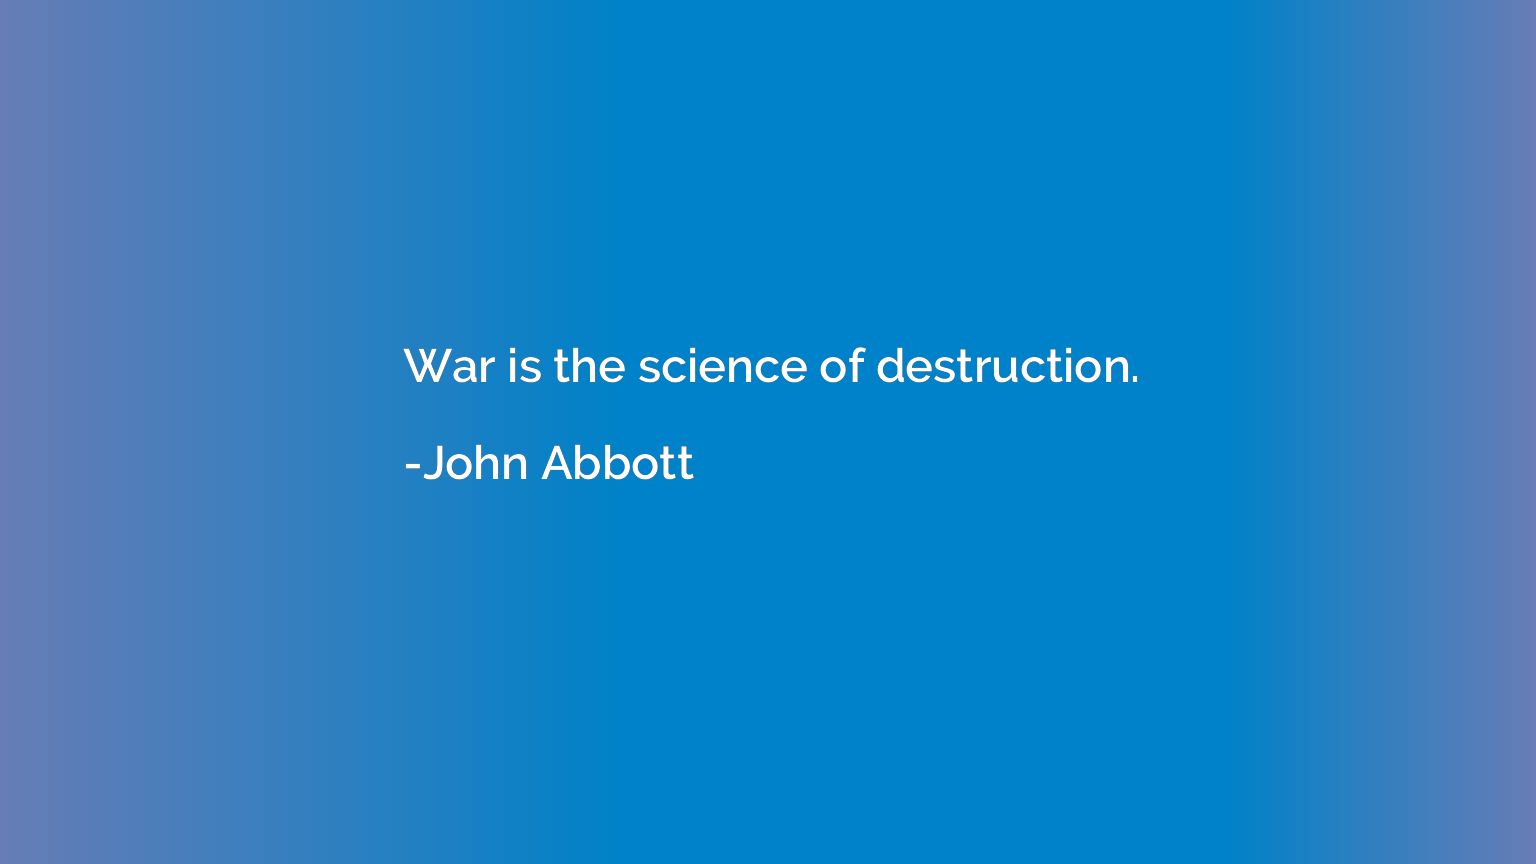 War is the science of destruction.